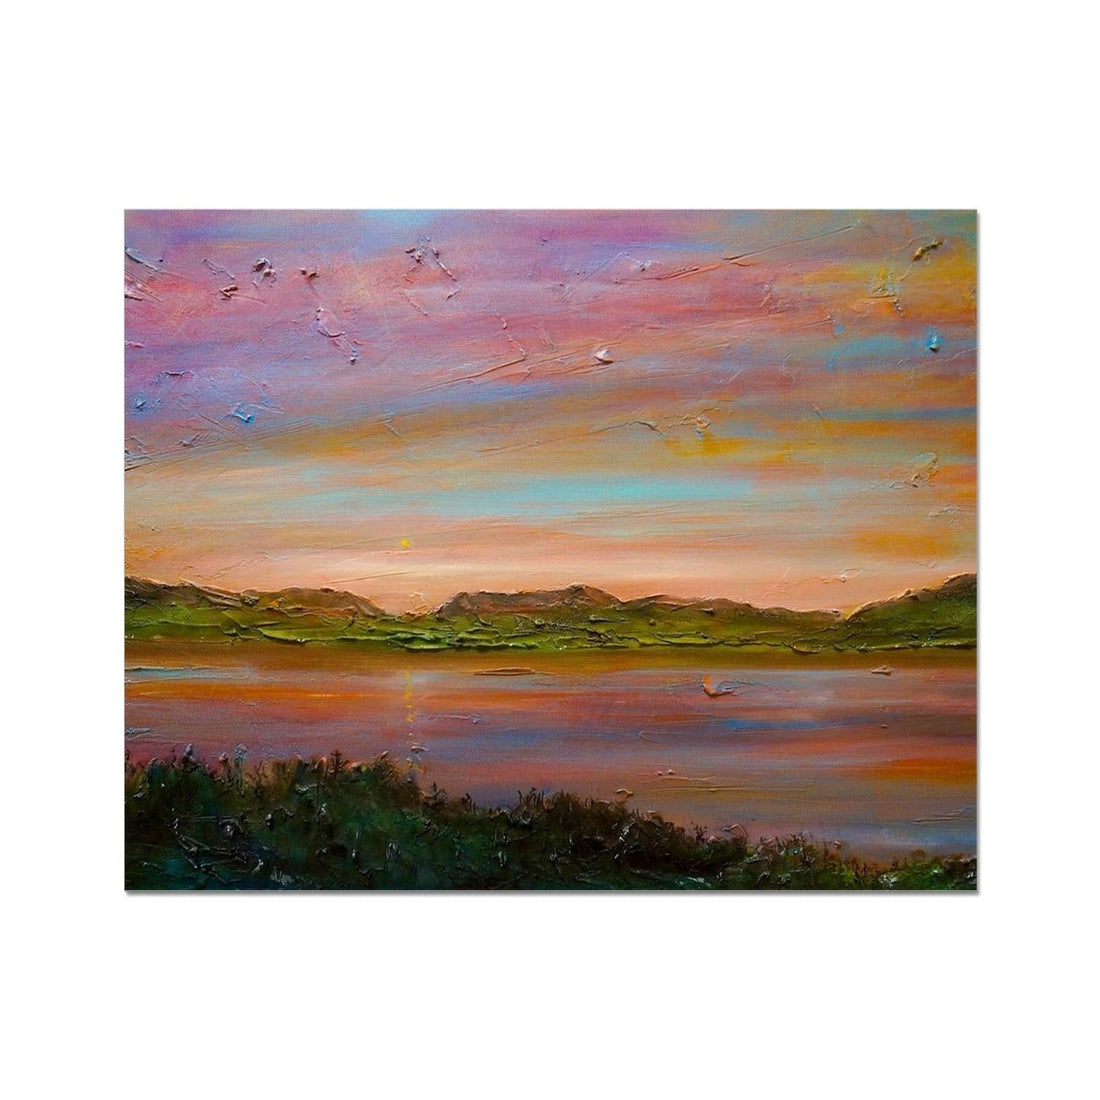 Gourock Golf Club Sunset Painting | Artist Proof Collector Print | Paintings from Scotland by Scottish Artist Hunter